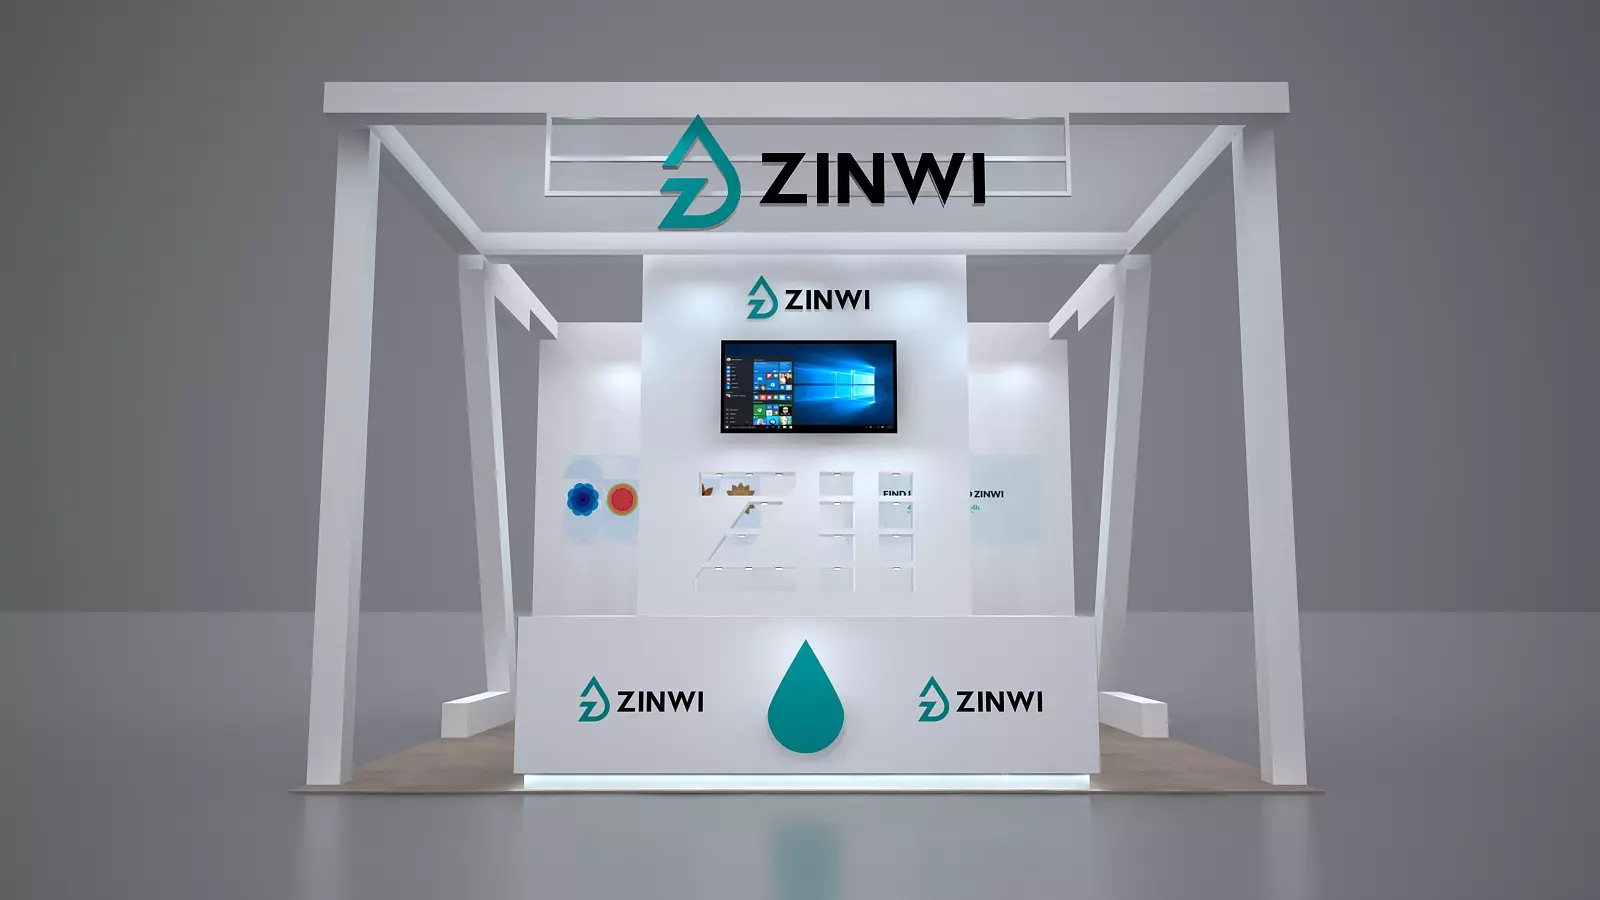 Zinwi's new brand image signifies the company's entry into a new development phase. 